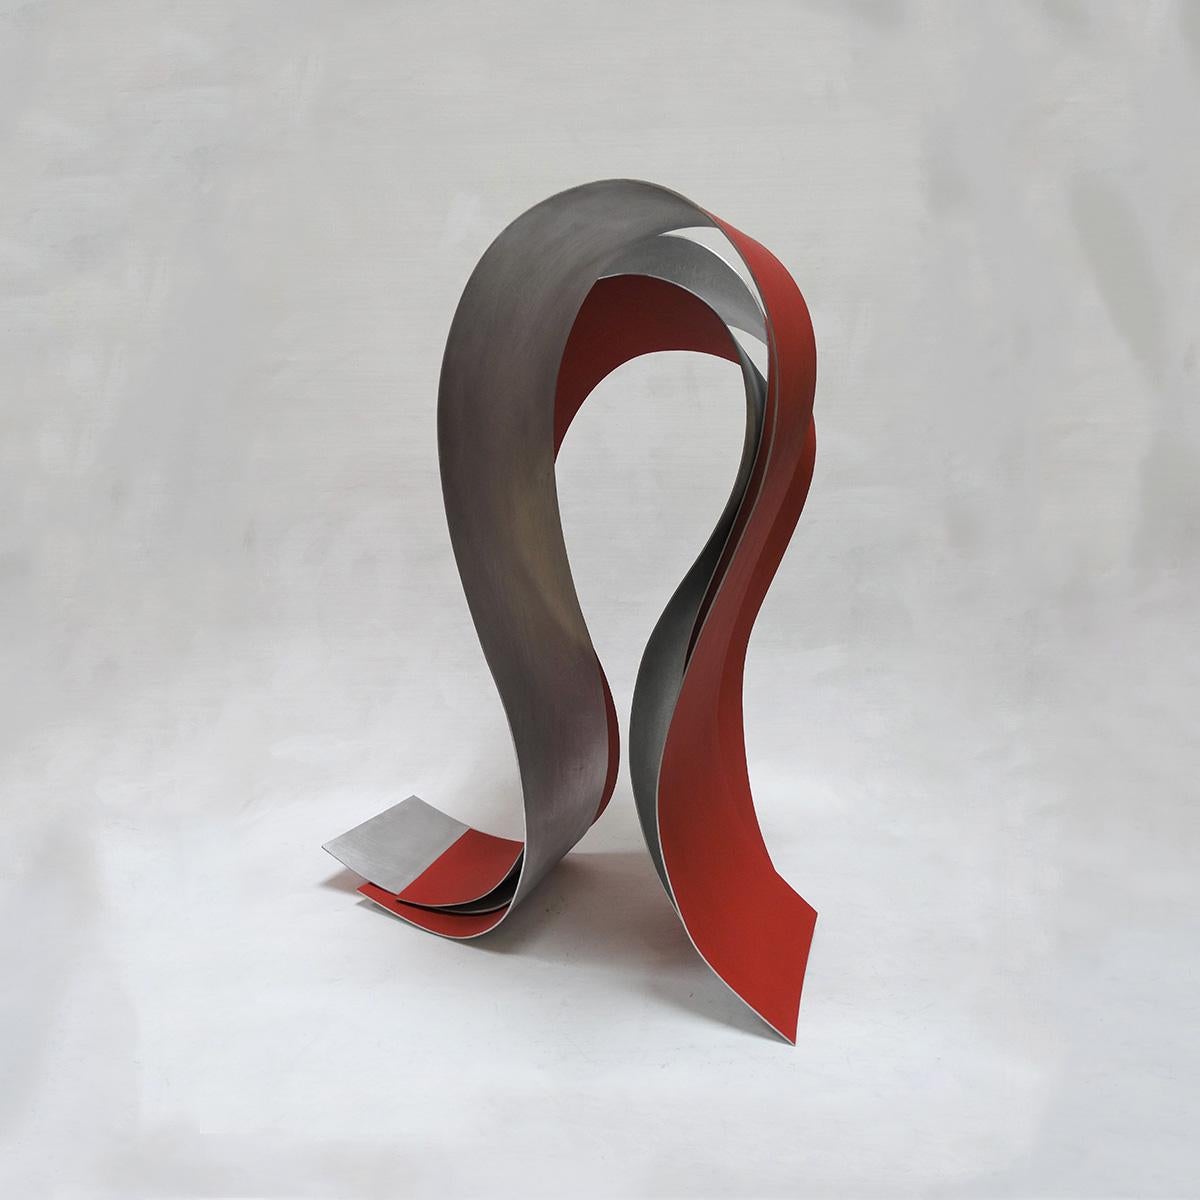 Inspired by art history, music, poetry and great artists such as Alexander Calder, Rafael Amorós is a Spanish artist who creates abstract one-of-a-kind sculptures entirely by hand at his artisanal workshop in Valencia. His works are an ode to design